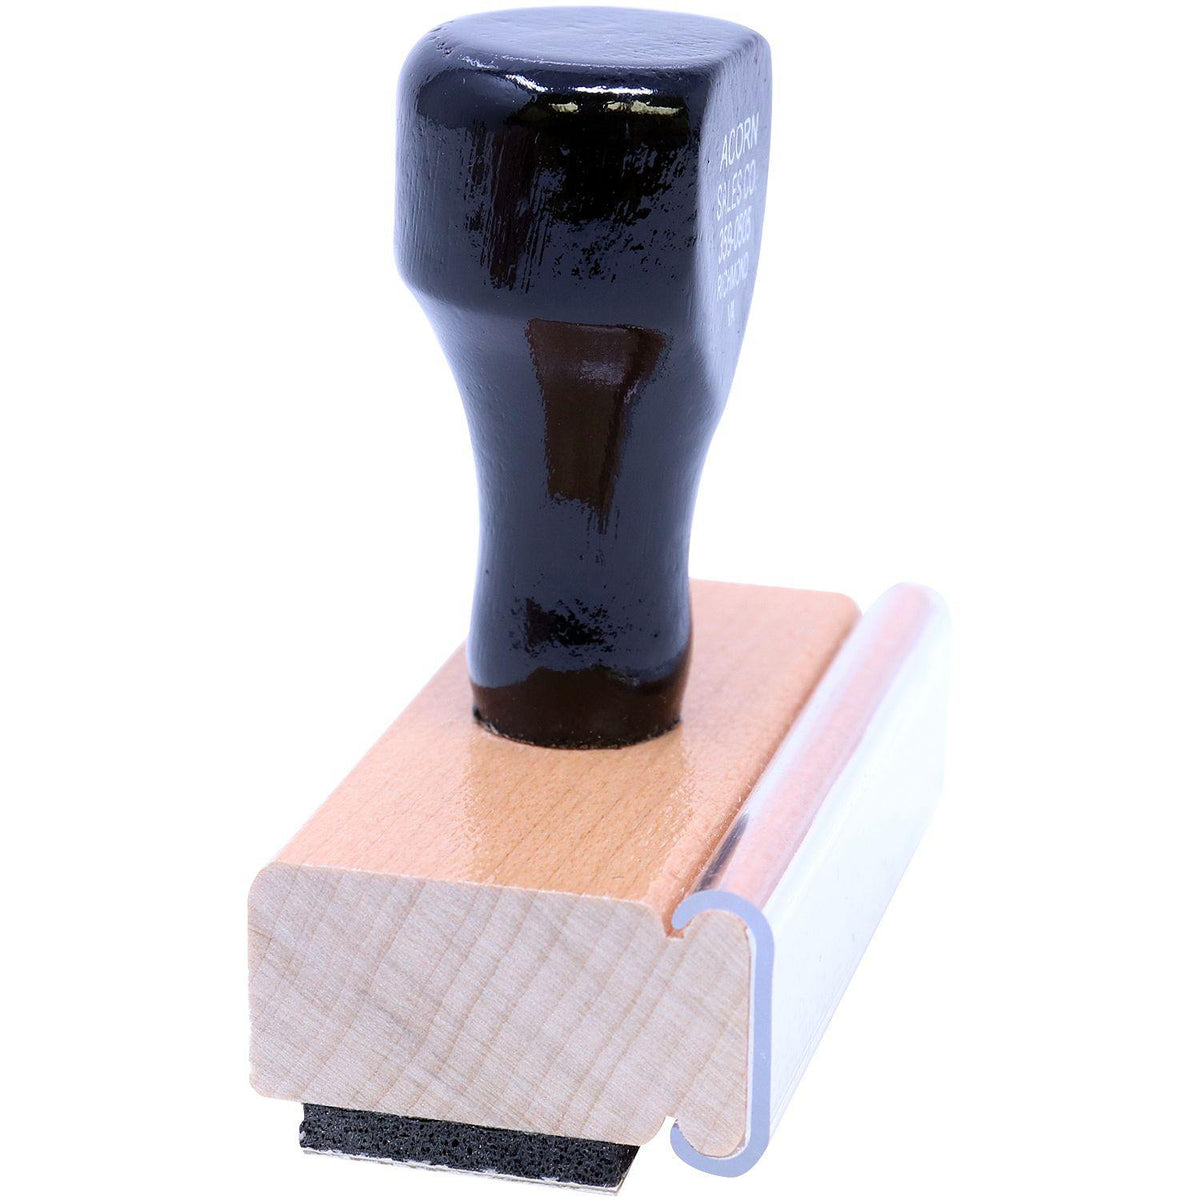 Side View of Approved For Payment Rubber Stamp at an Angle